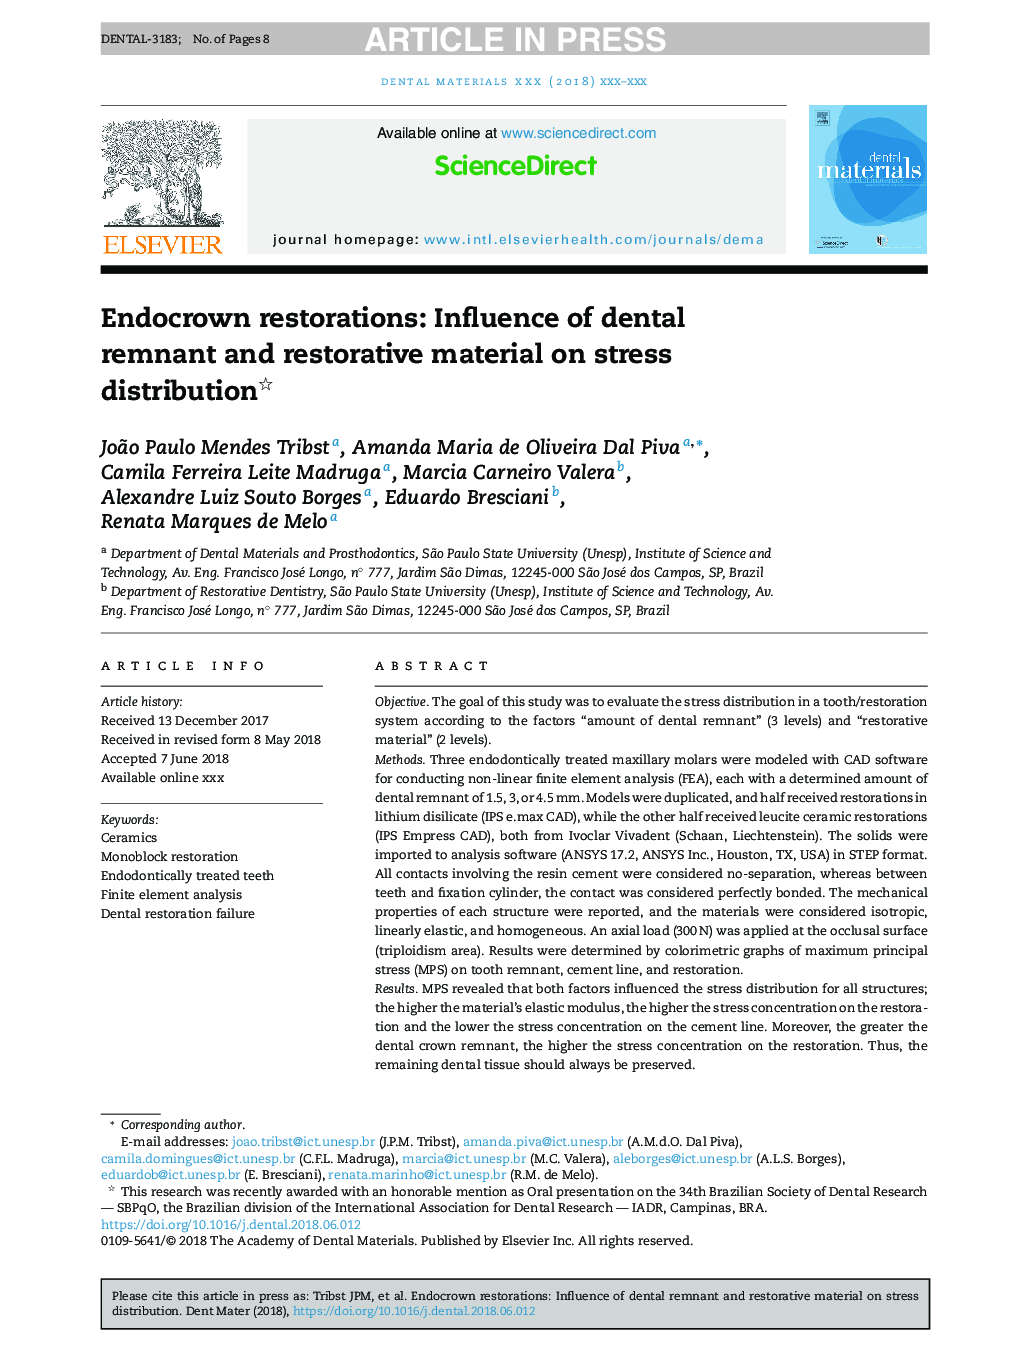 Endocrown restorations: Influence of dental remnant and restorative material on stress distribution